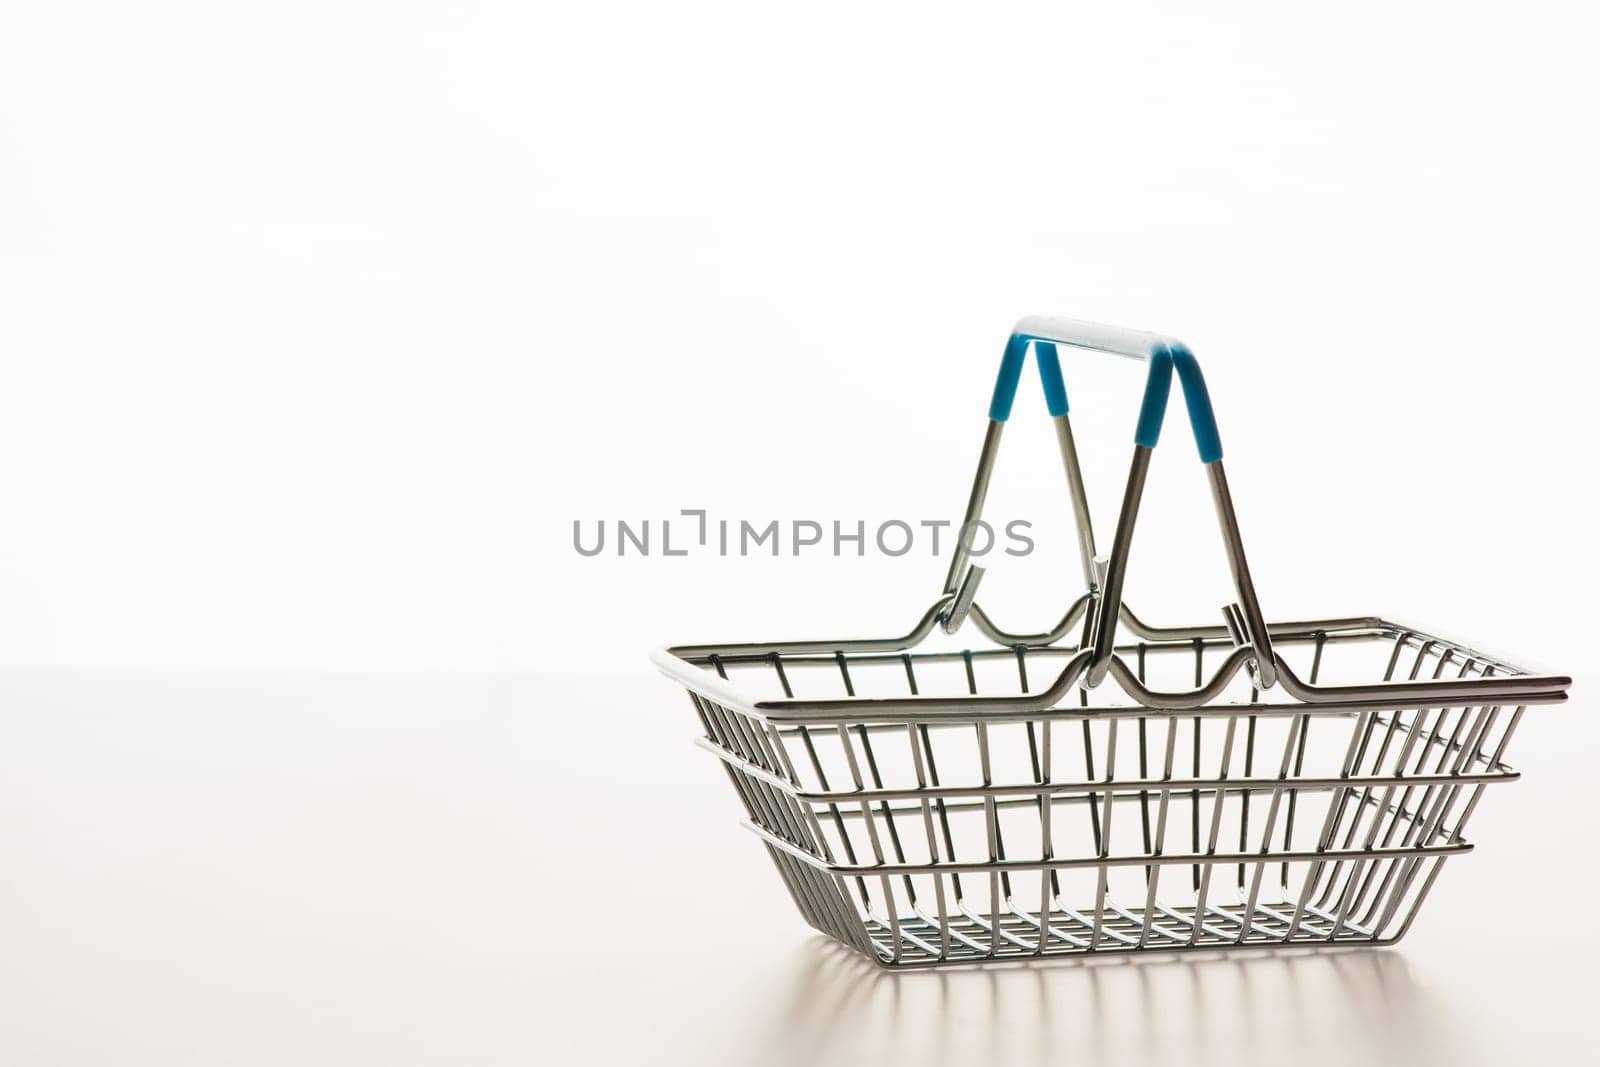 Wire shopping basket isolated on a white background.